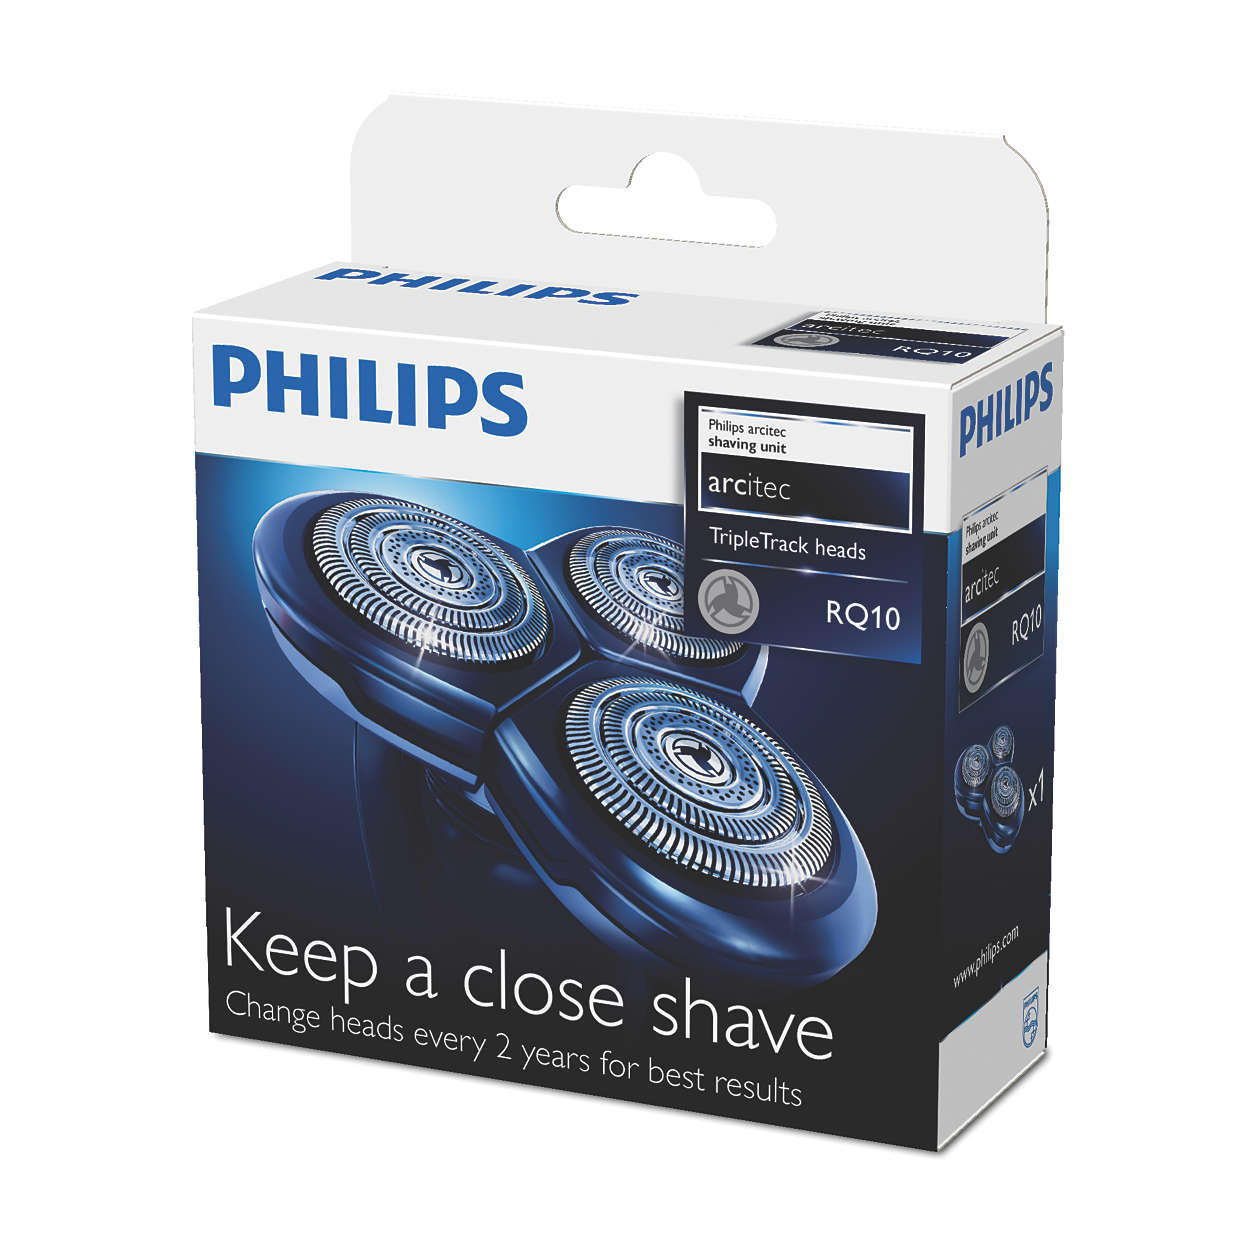 Keep a close shave